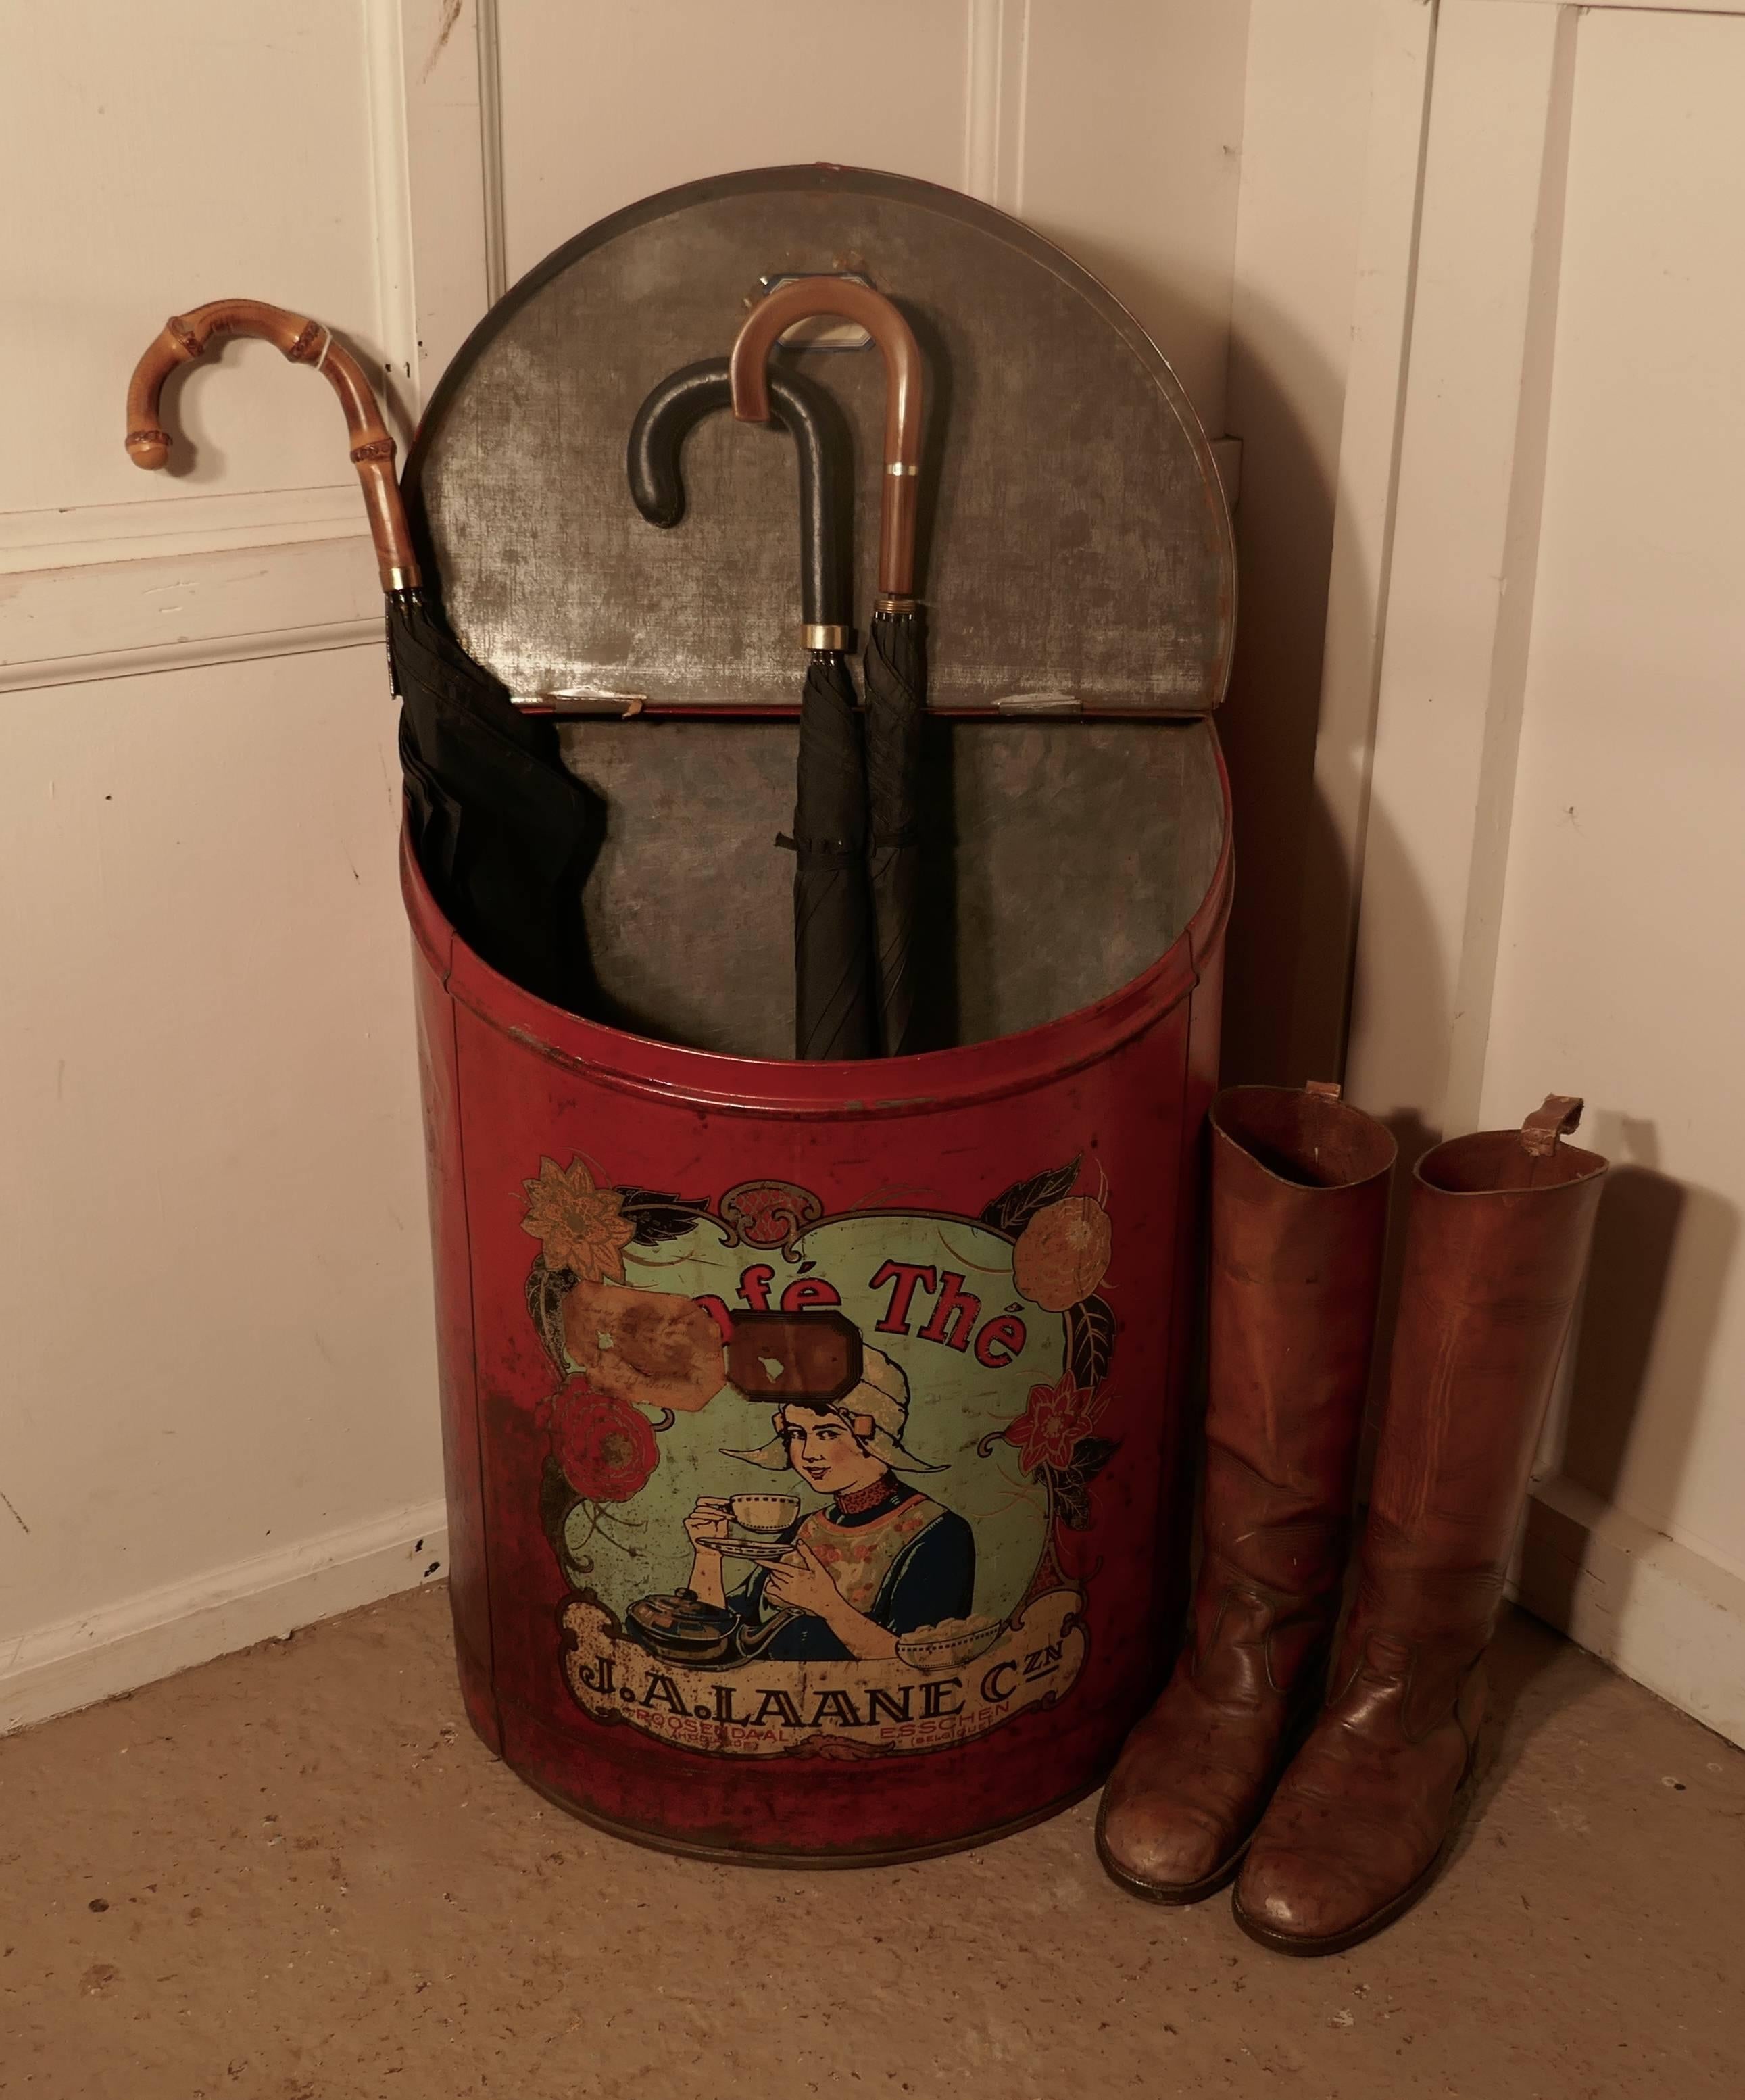 Very Large Dutch and Belgian grocers shop tea or coffee canister

A large grocers shop tin would make a quirky umbrella stand Industrial antique

This is lovely large grocers shop coffee or tea canister, it has curved front and it is brightly